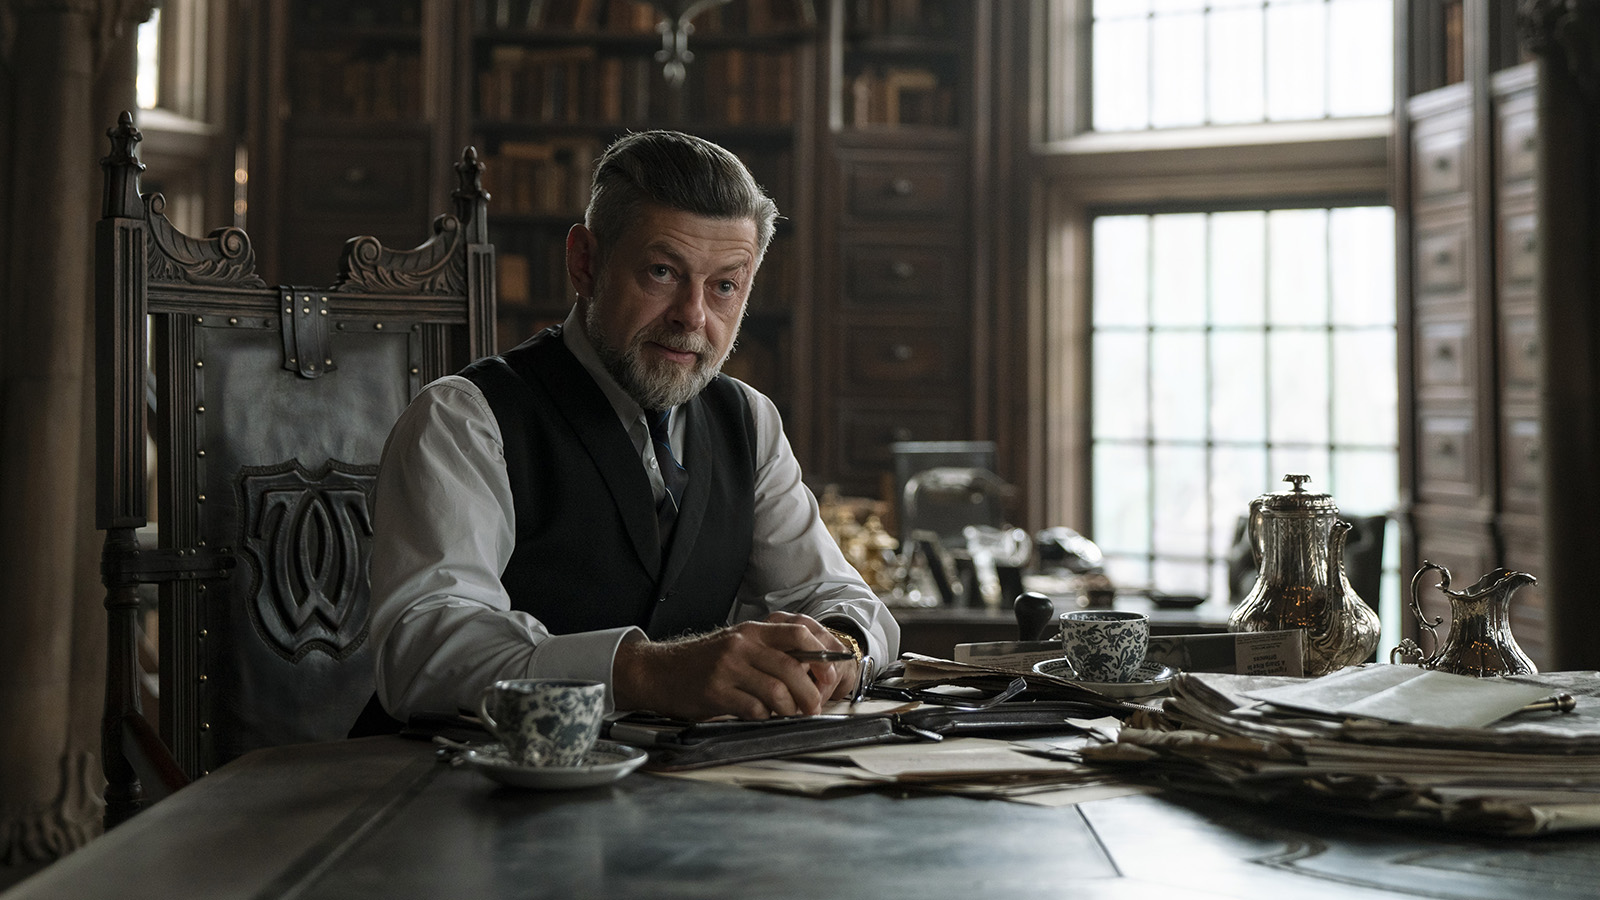 Arthur (Andy Serkis) may be sheltering Bruce Wayne from the truth in The Batman. Image © Warner Bros.